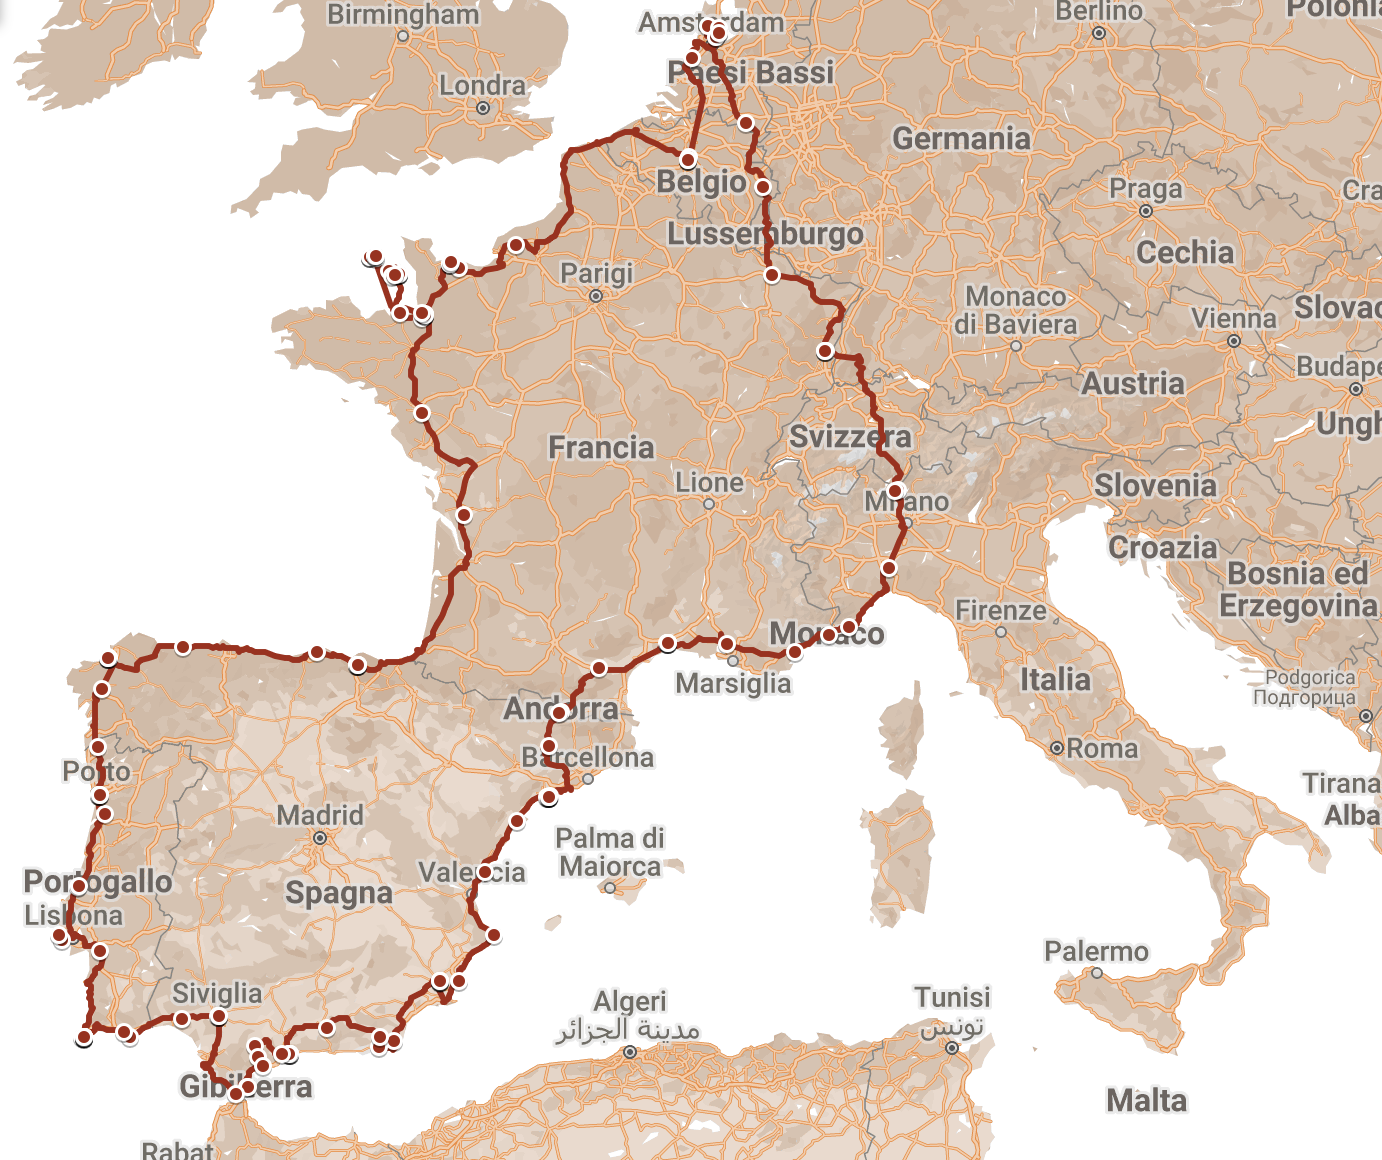 Bagger's Life Ride to Western Europe - Coastal road